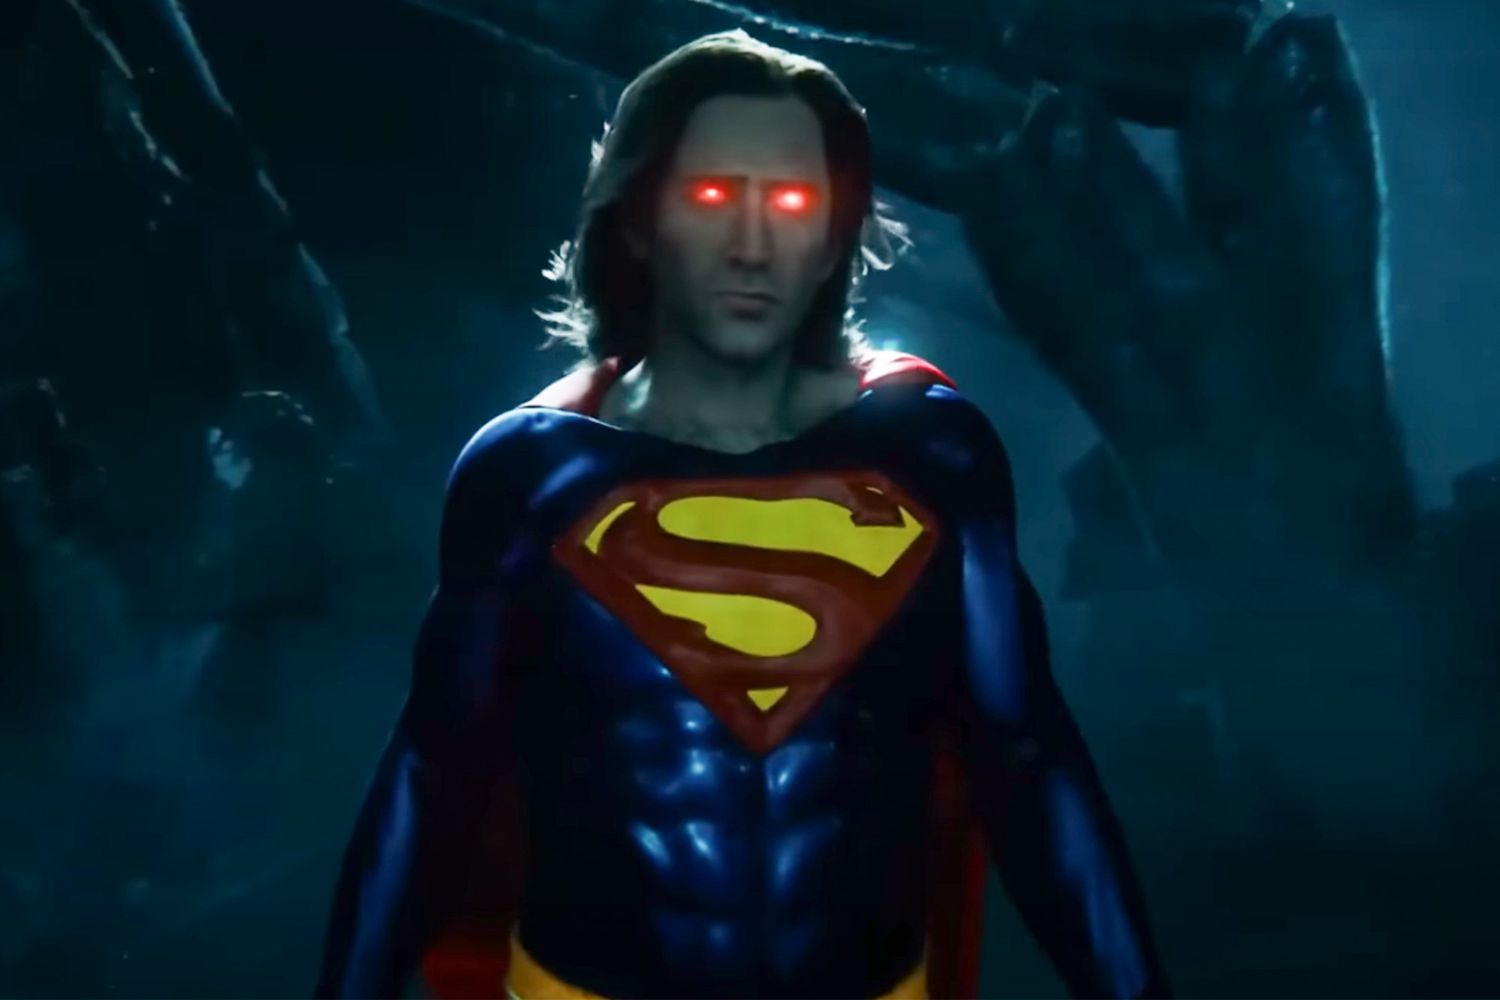 Superman's cameo in The Flash movie, played by Henry Cavill, has already been filmed.